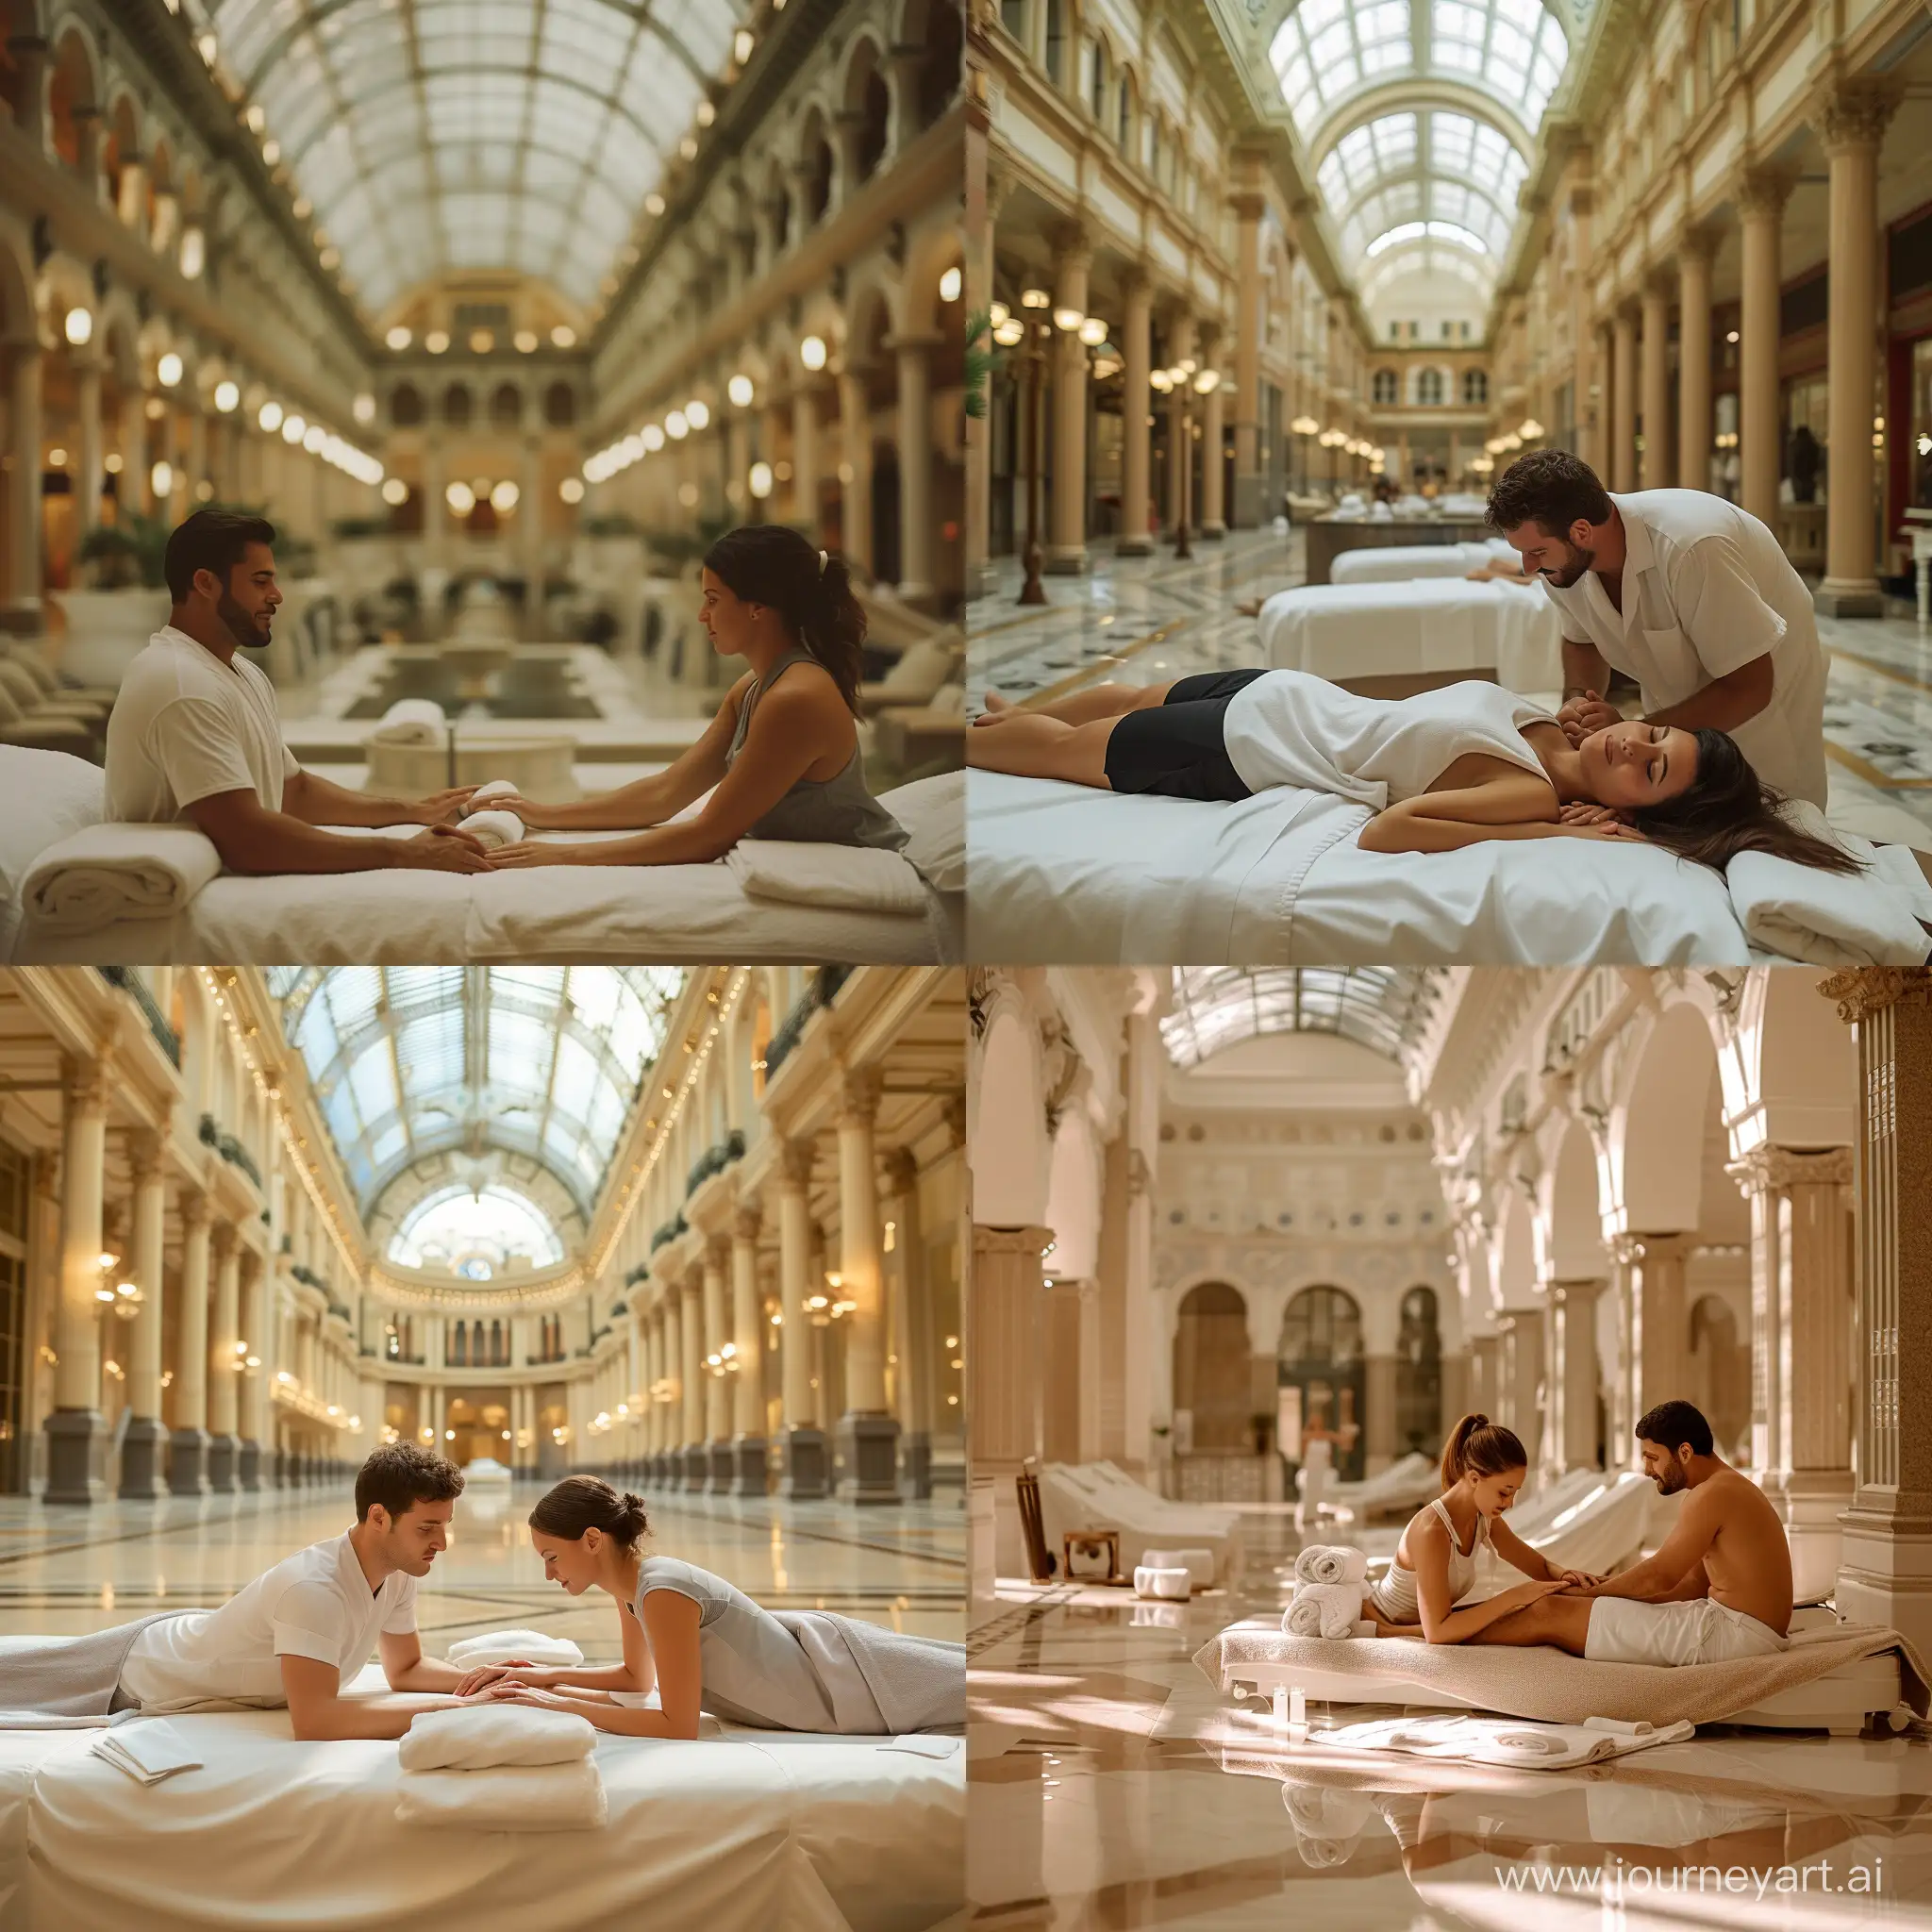 Relaxing-Couple-Enjoying-Massages-in-Spacious-Hall